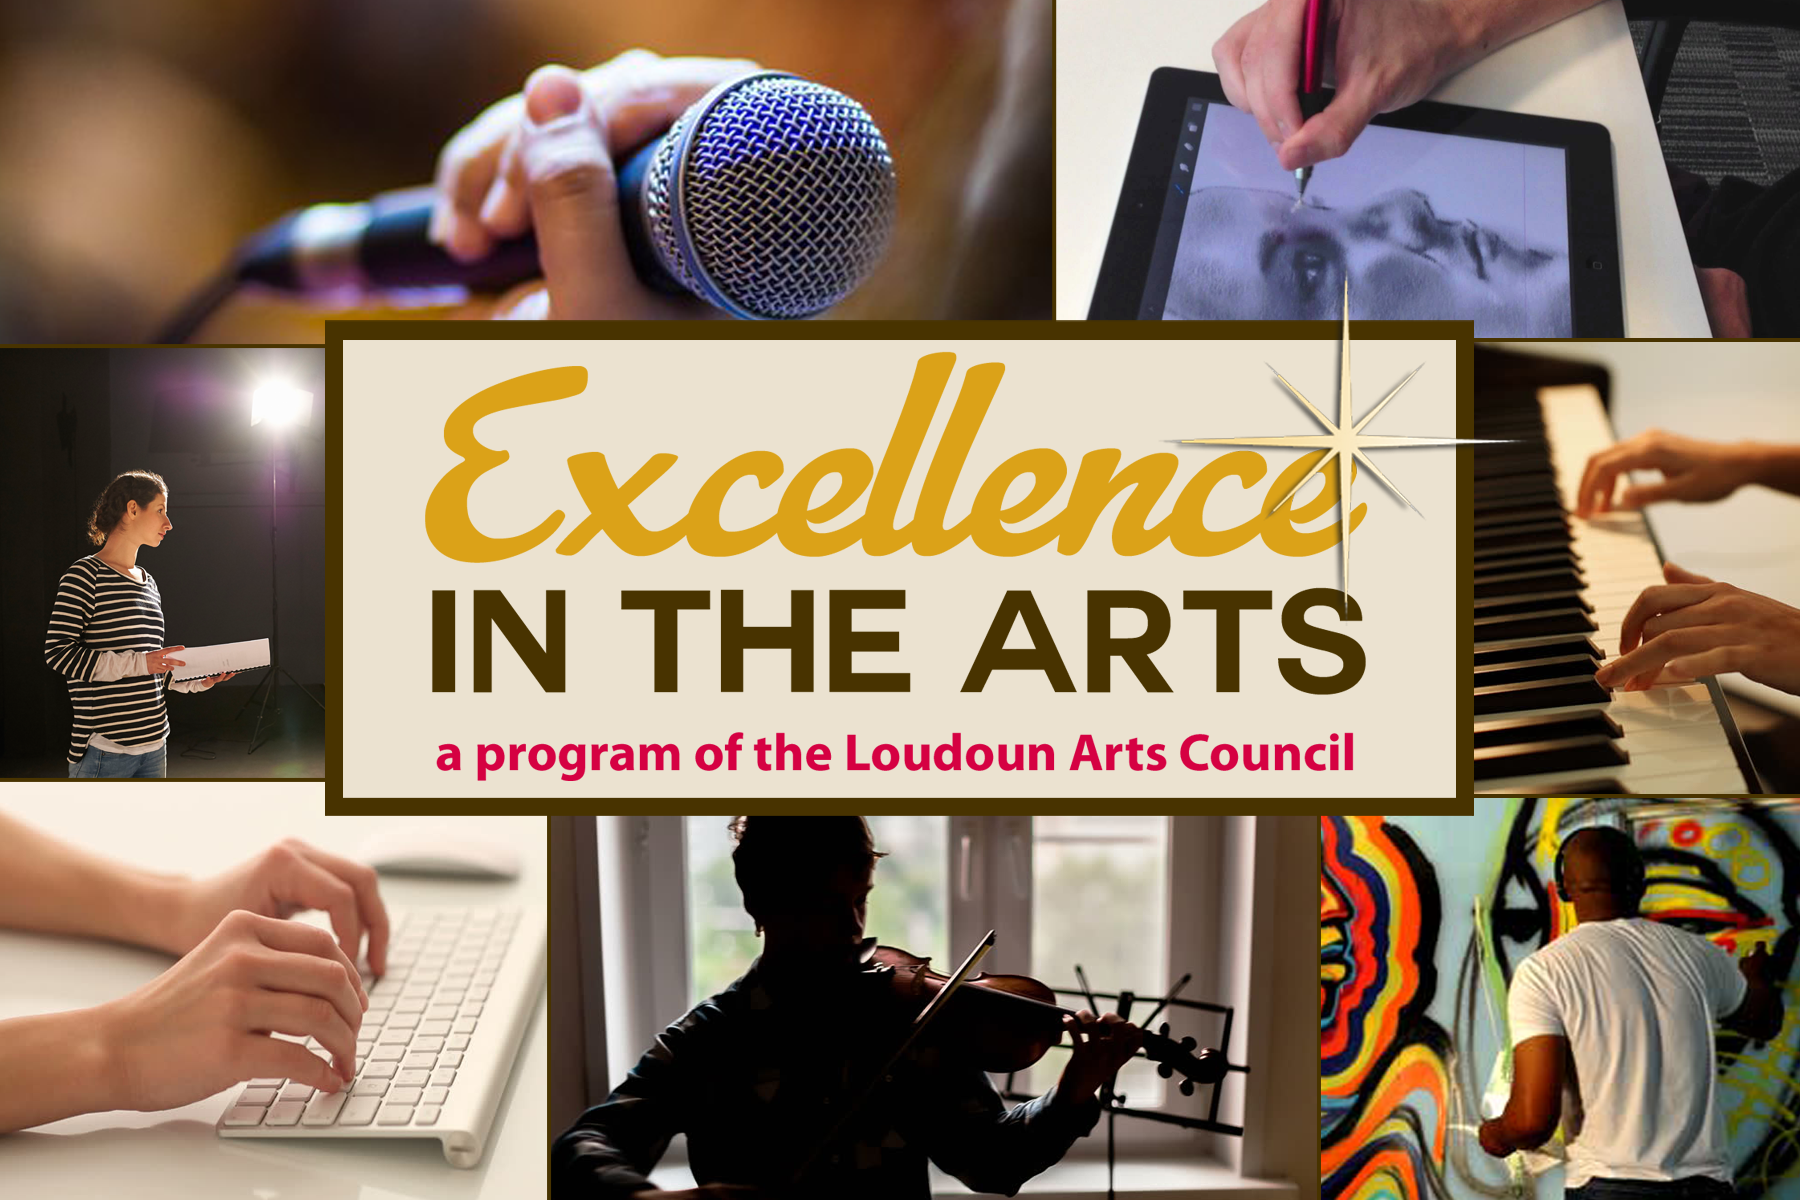 Excellence is an awards program for young visual, performing, and literary artists